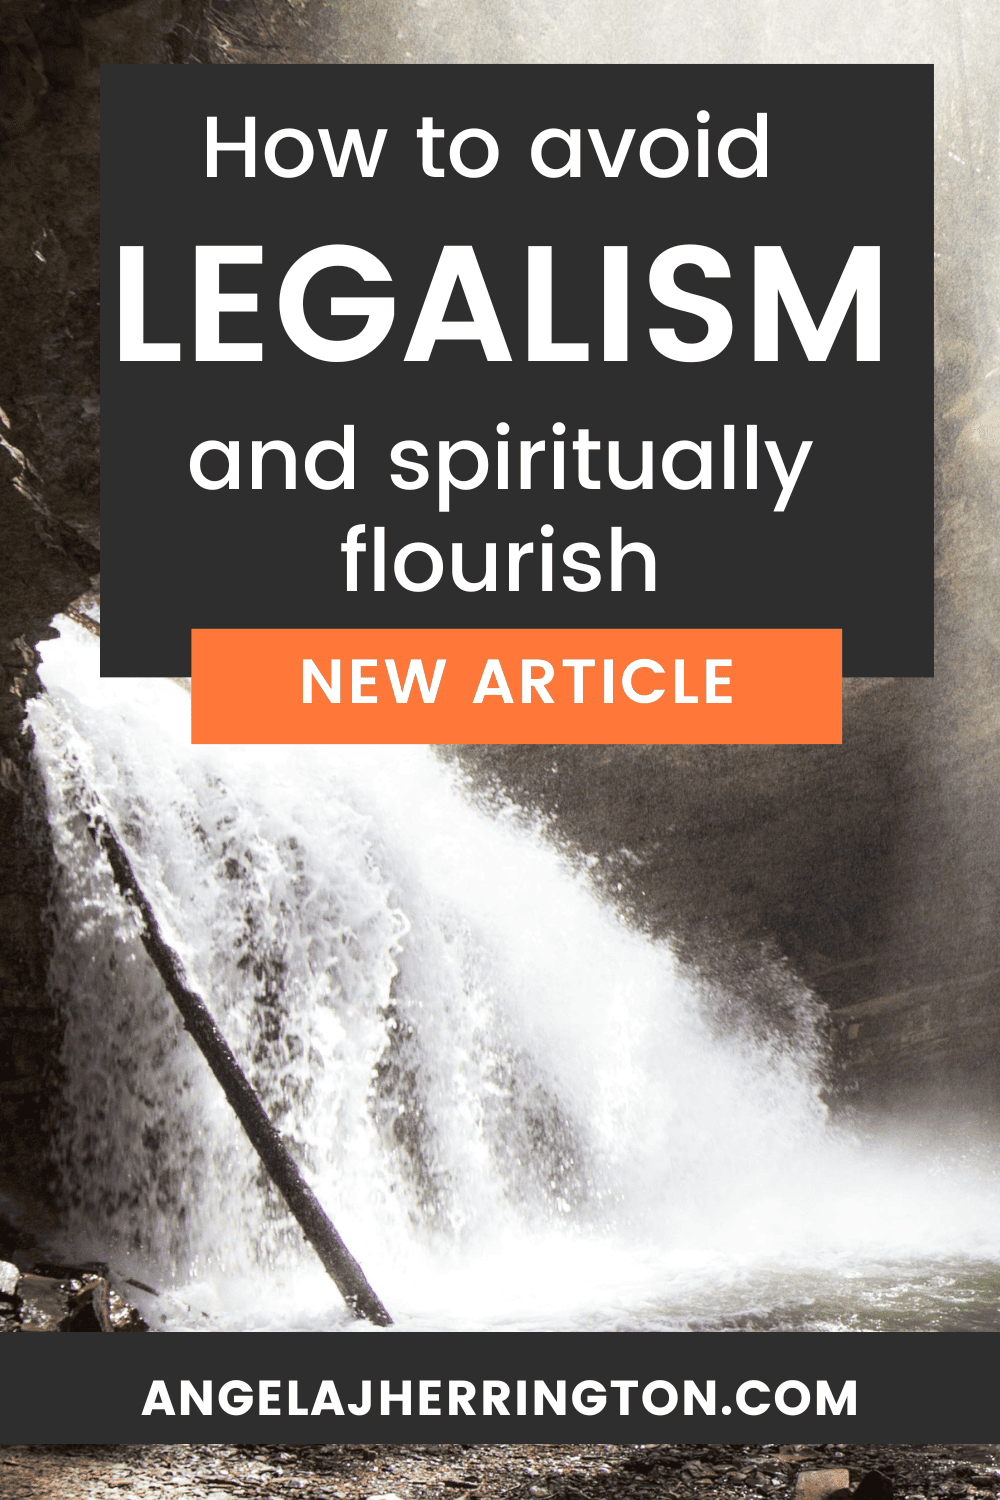 How to avoid legalism and spiritually flourish written in white text on a navy background. A picture of a waterfall is in the background.